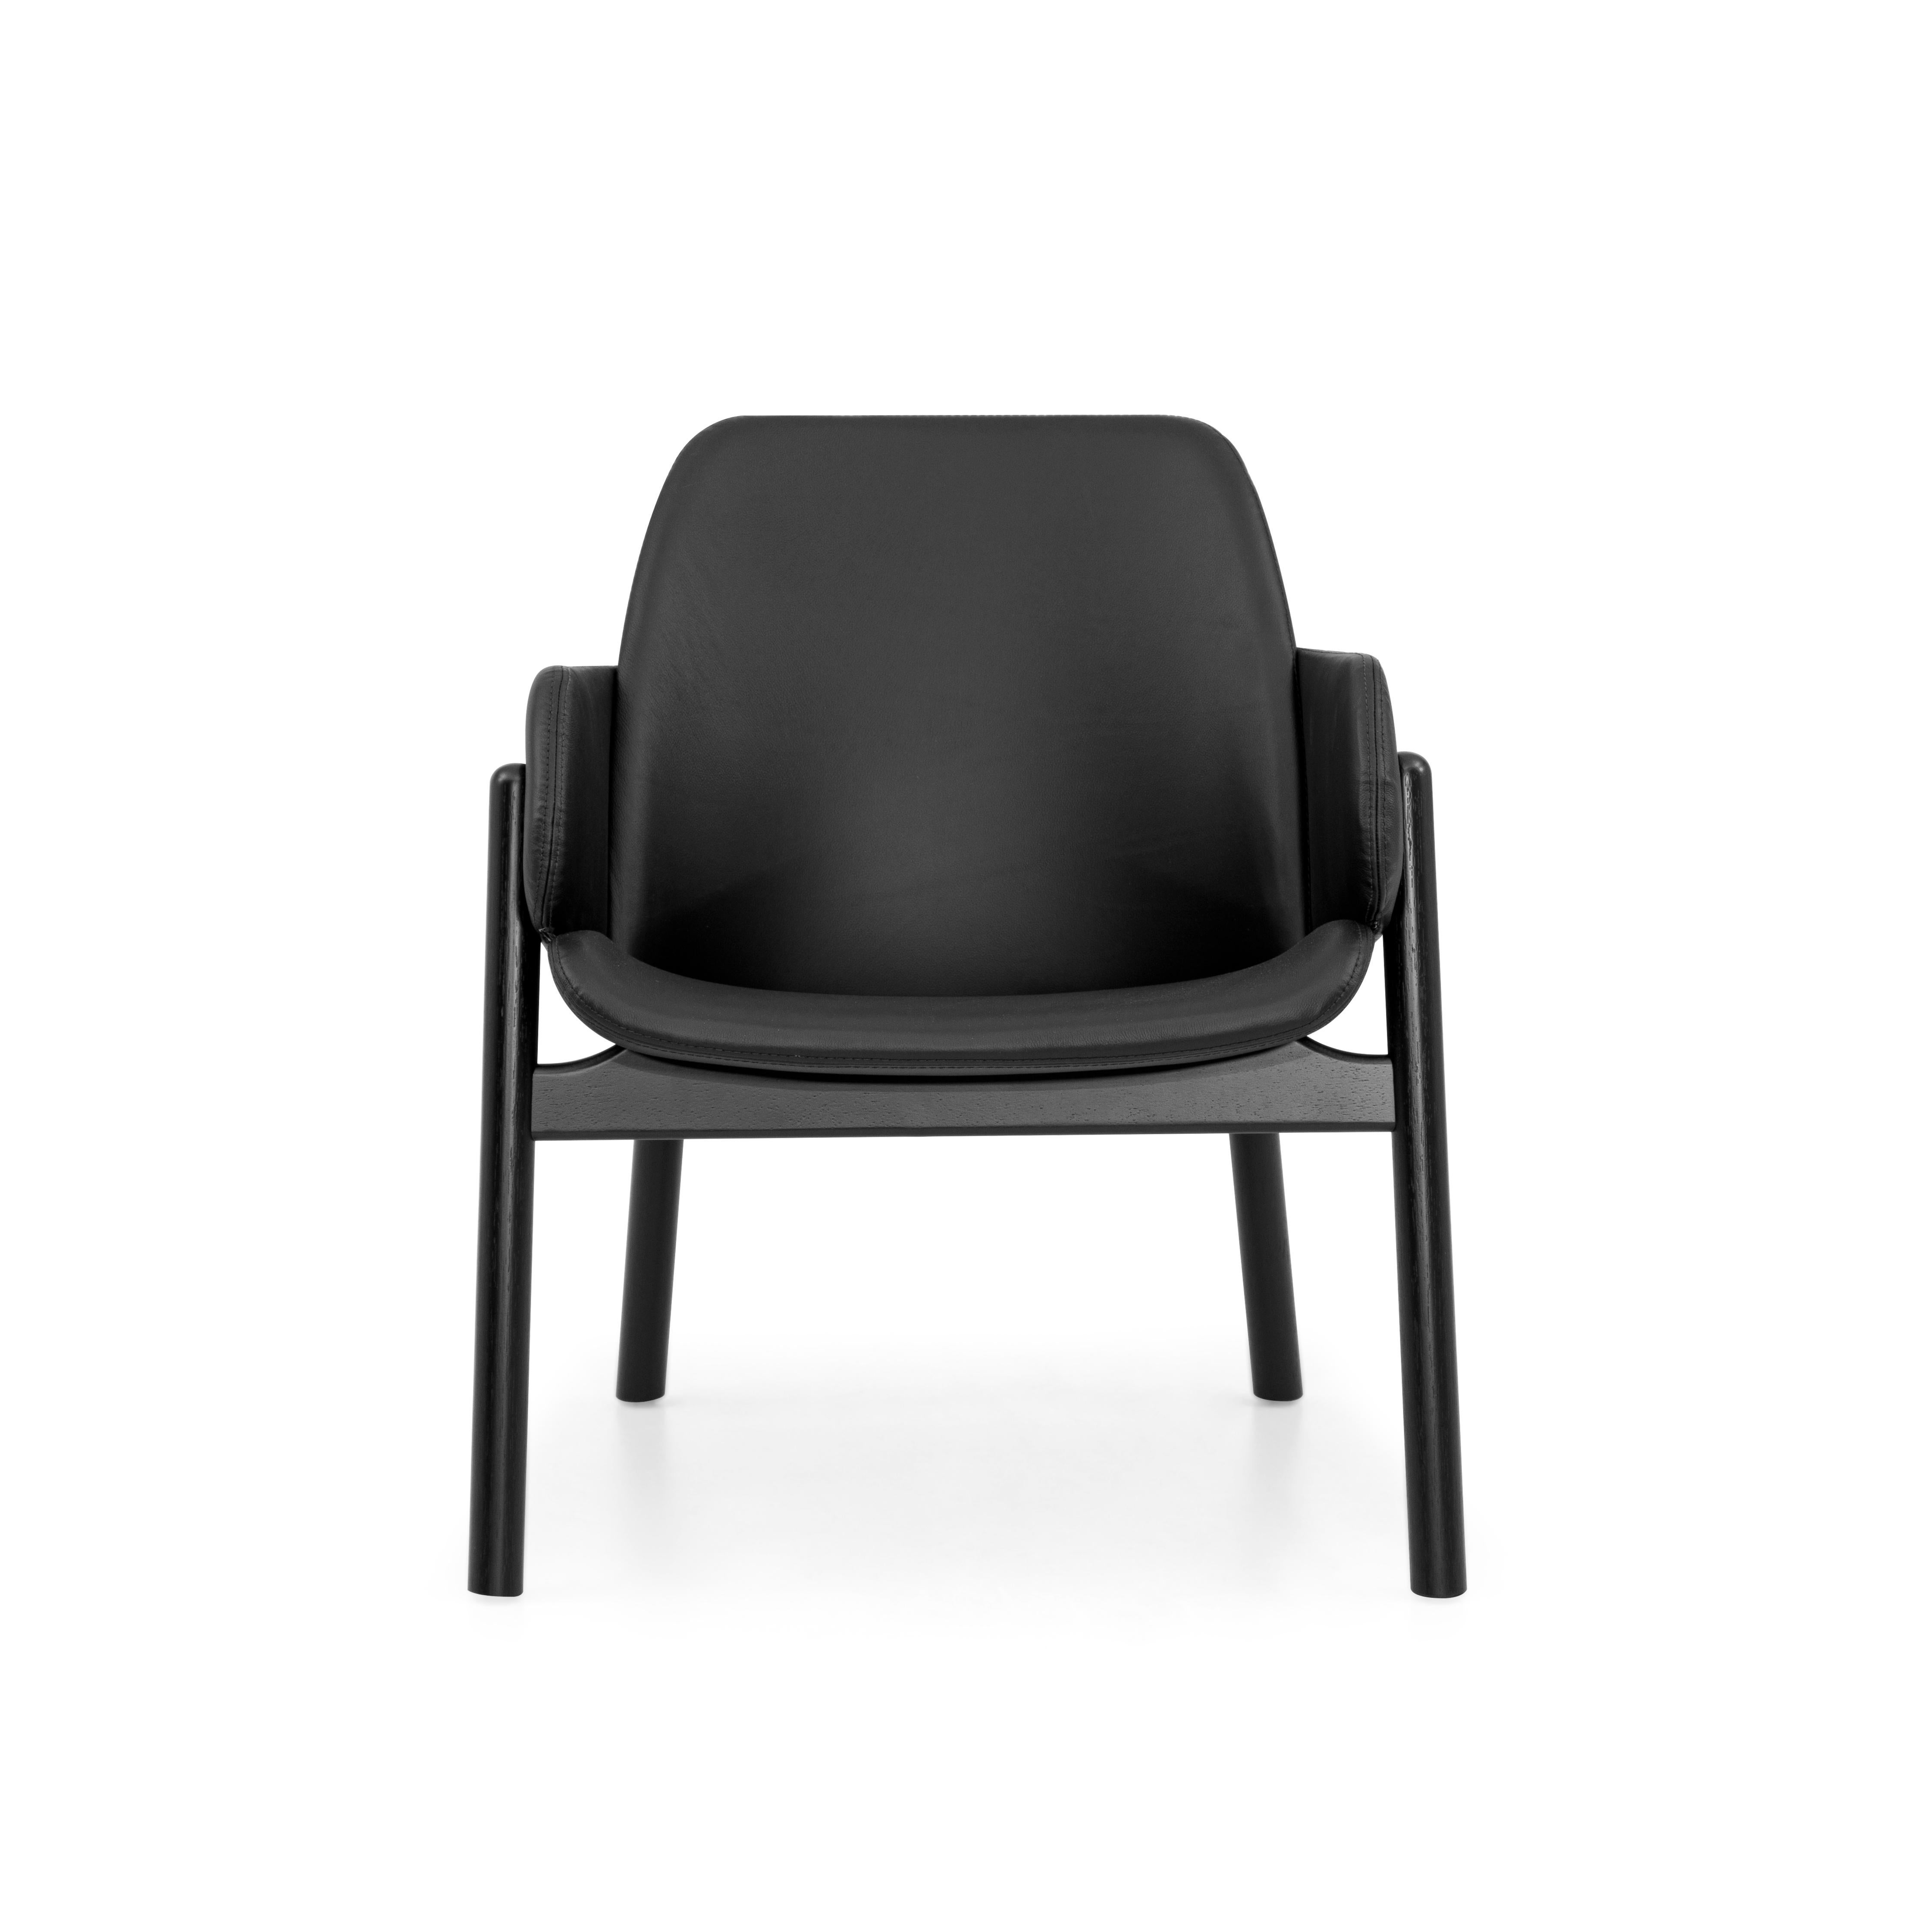 The above chair goes above and beyond in terms of design and comfortability. The combination of the black leather and the black painted frame allows you to mix the Above chair in rooms already established and rooms with a new design. The seat, back,